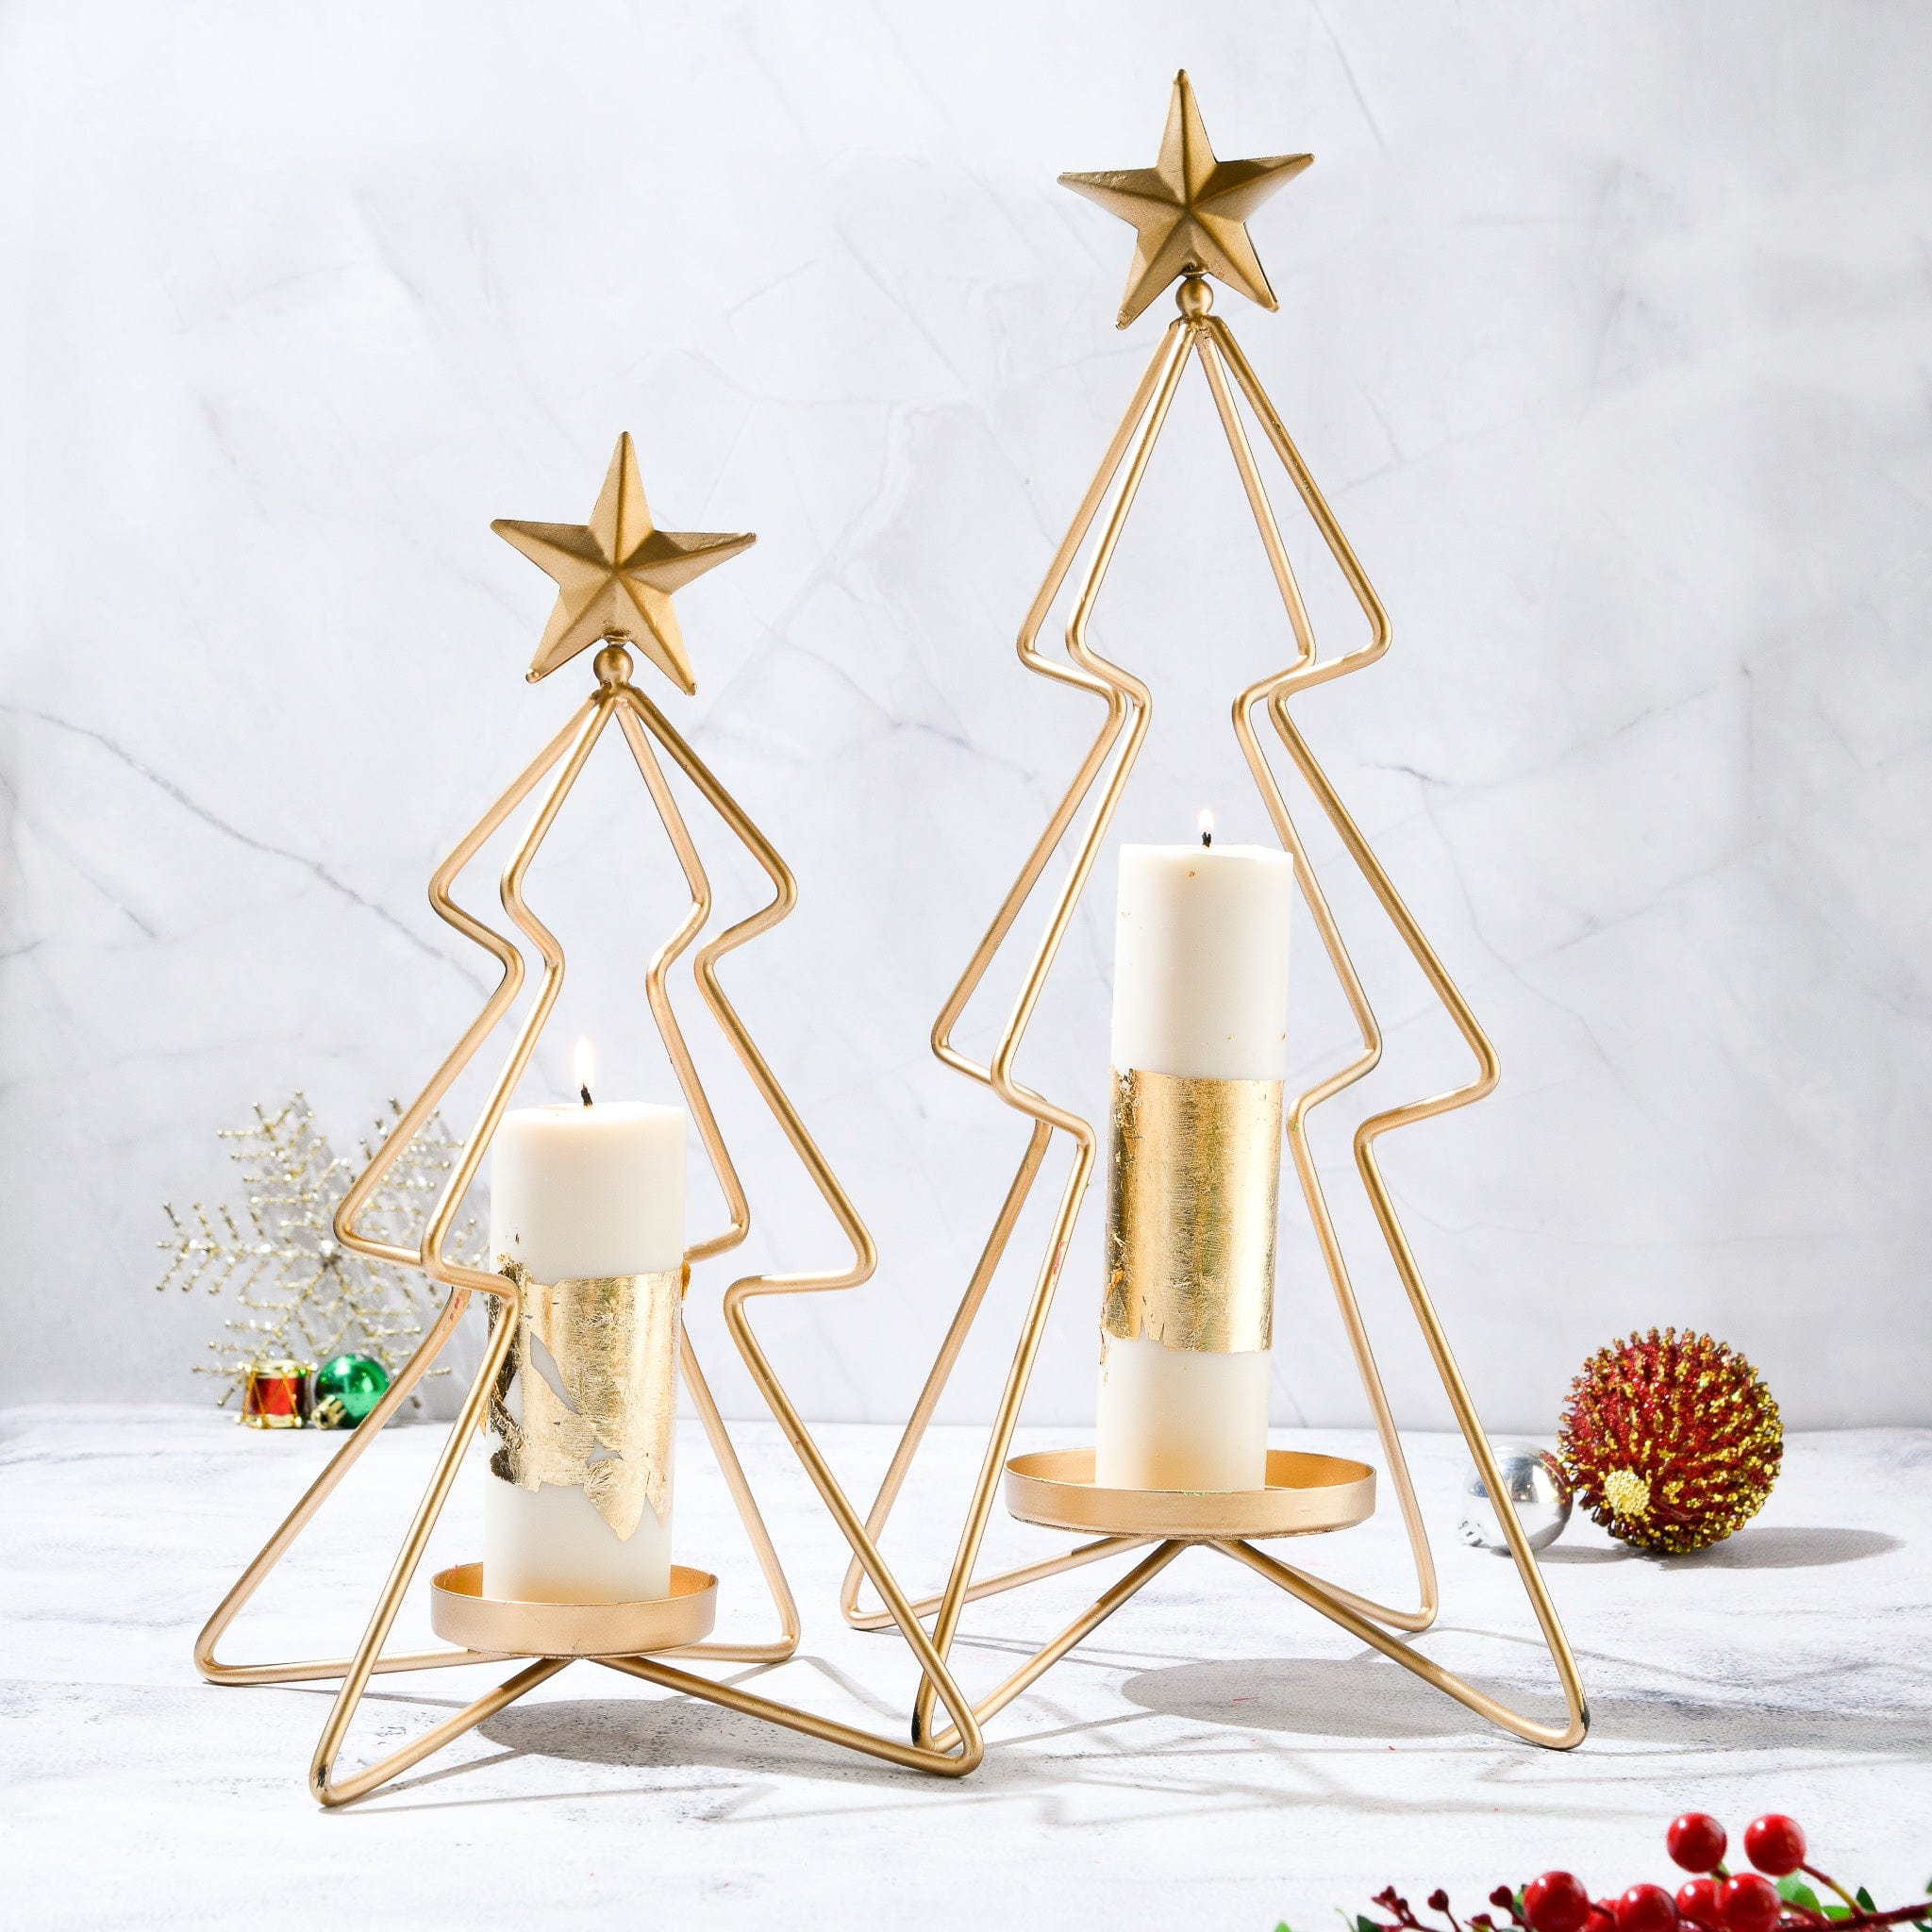 Set of 2 Christmas Tree Candle Stands with Free Scented Pillar Candles